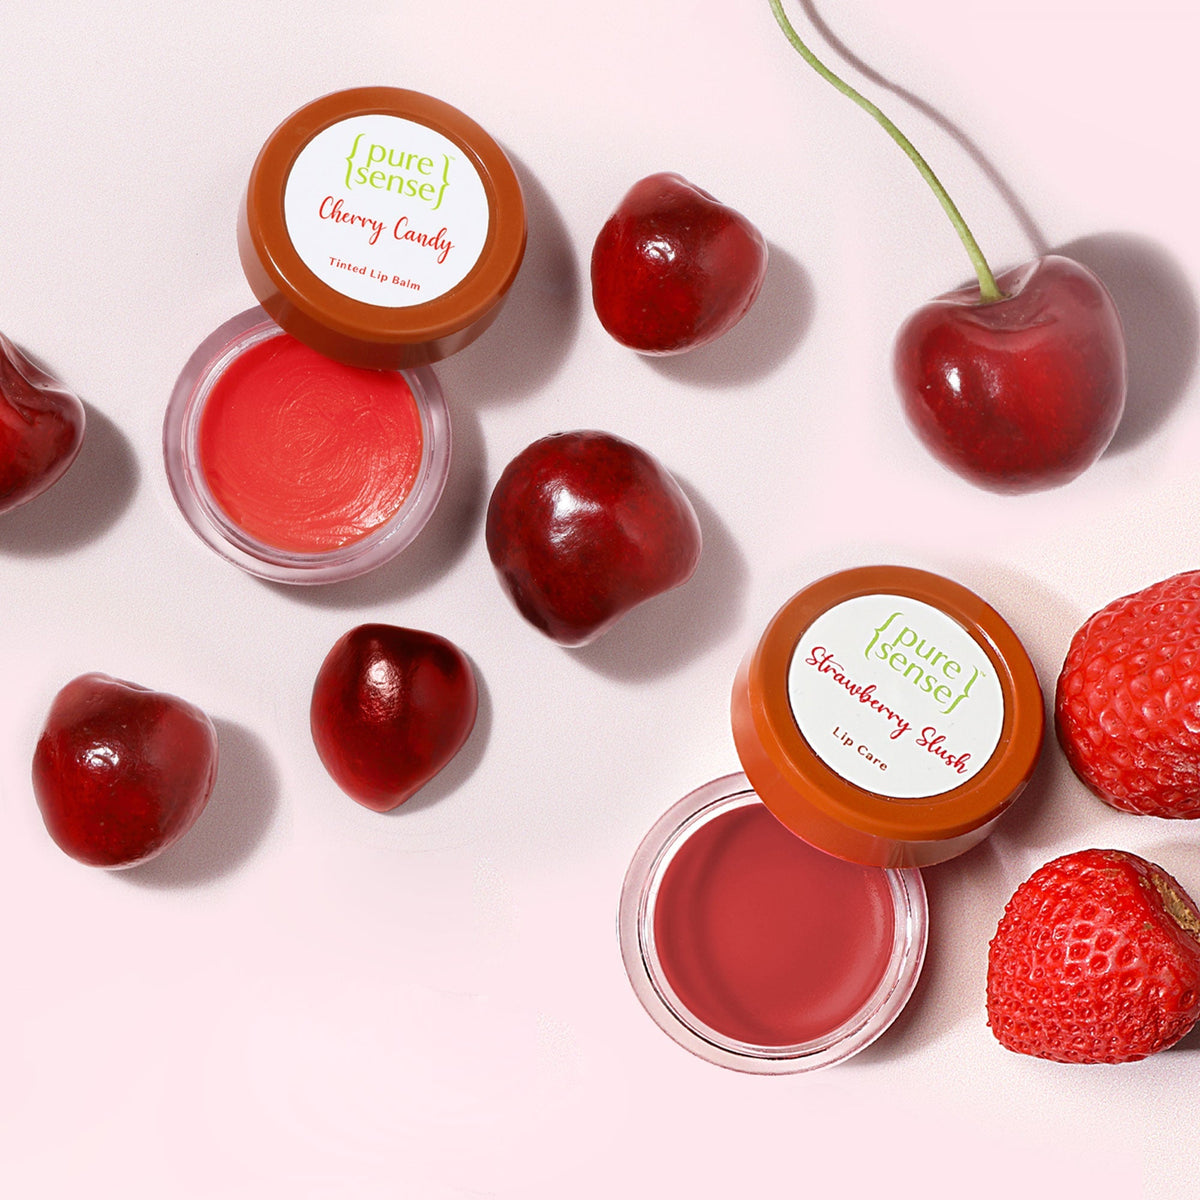 Cherry Candy Tinted Lip Balm 5ml + Pure Sense Strawberry Slush Lip Balm 5m | Pack of 2 | From the makers of Parachute Advansed | 10ml